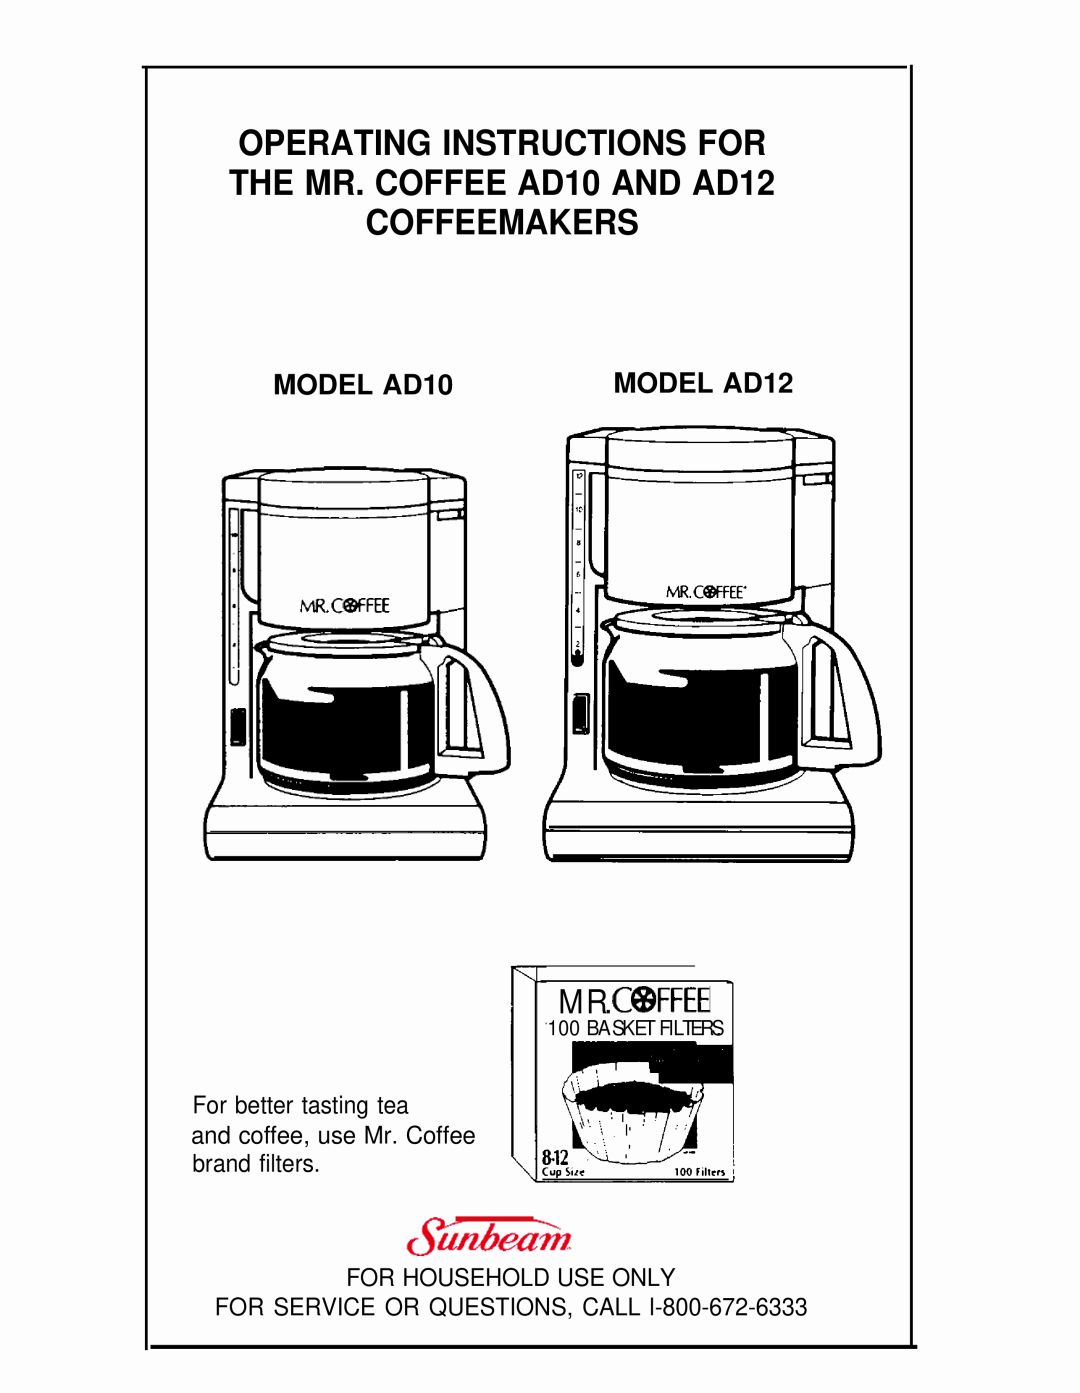 Mr. Coffee AD10 AND AD12 manual MODEL AD10, MODEL AD12, Coffeemakers, Mr.Cwfee, Basket Filters 